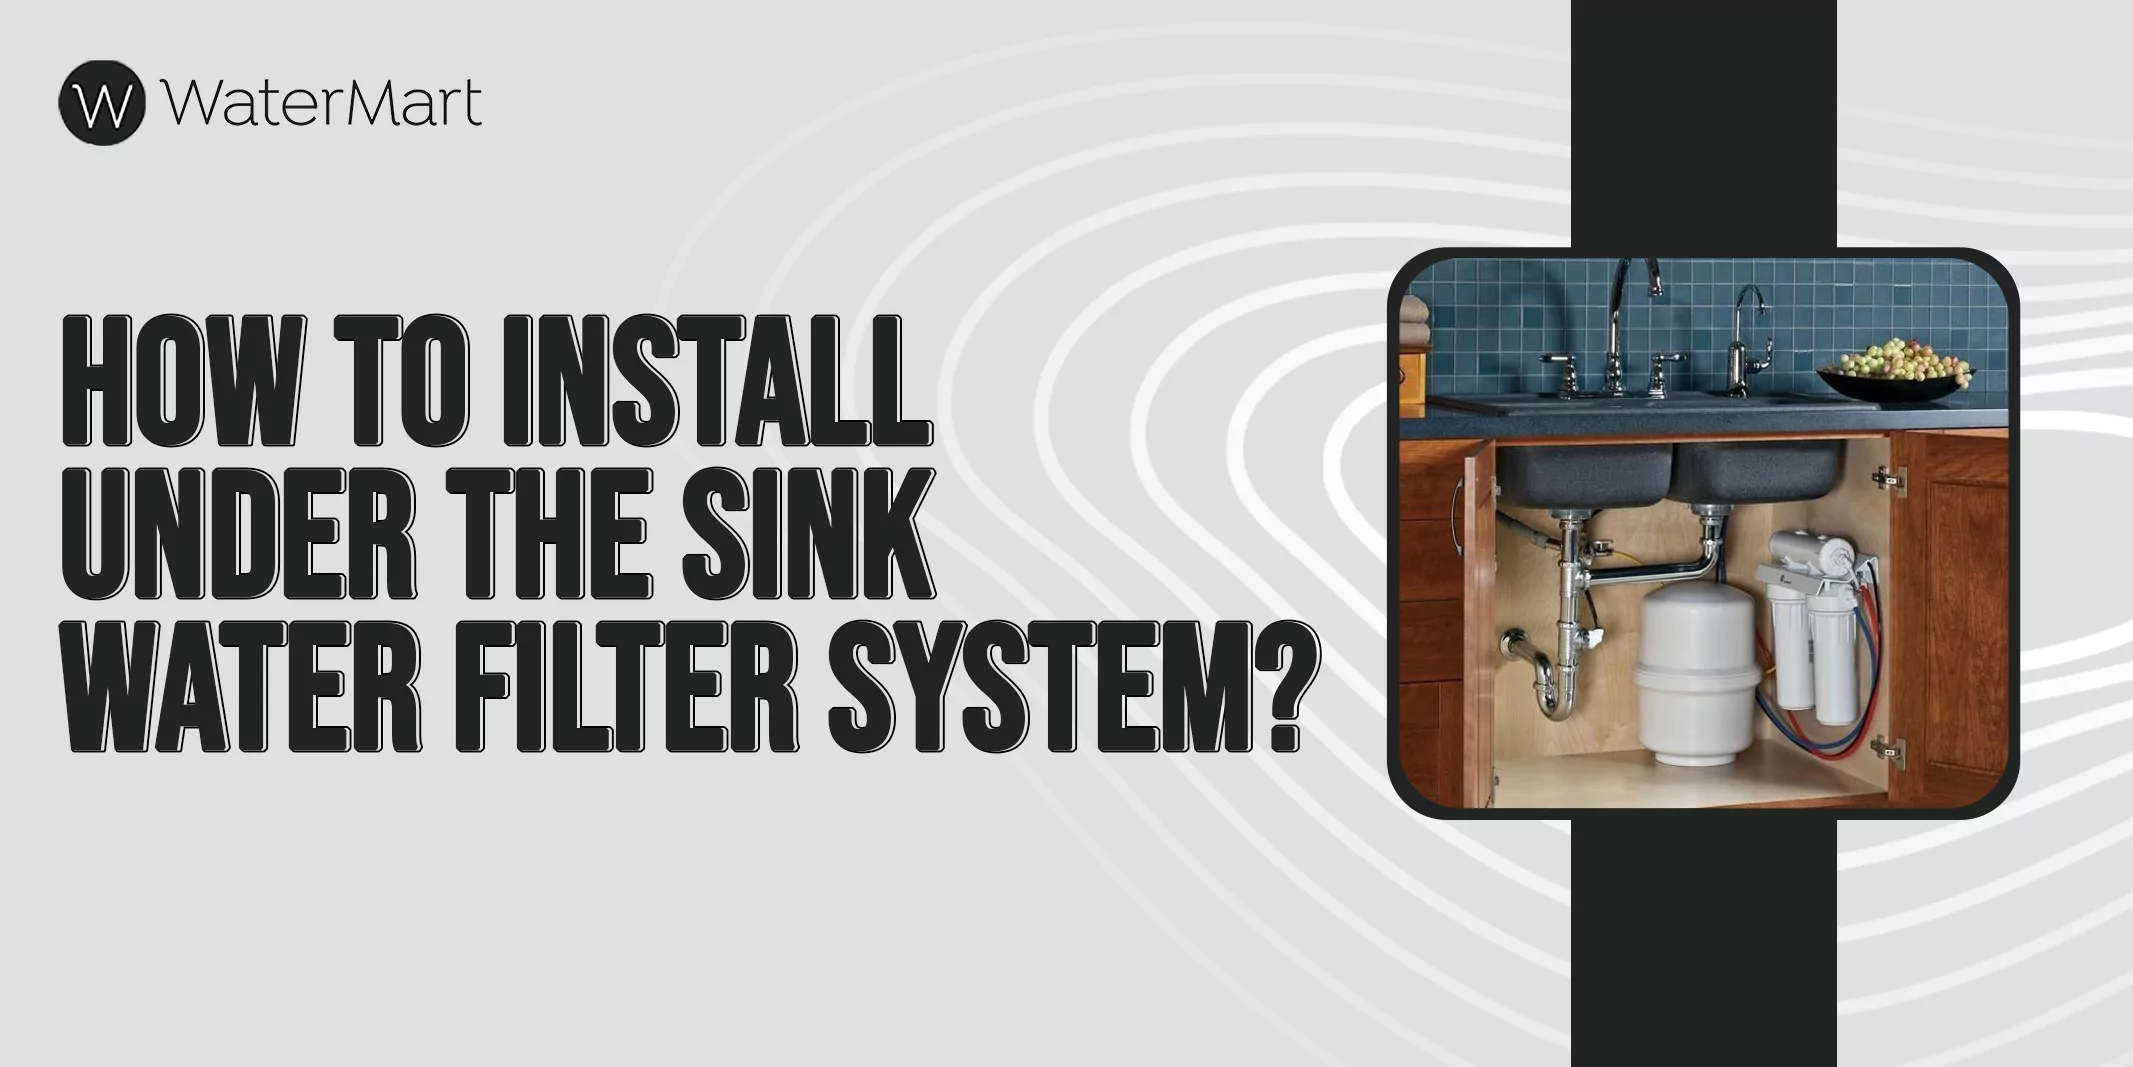 How to Install Under the Sink Water Filter?